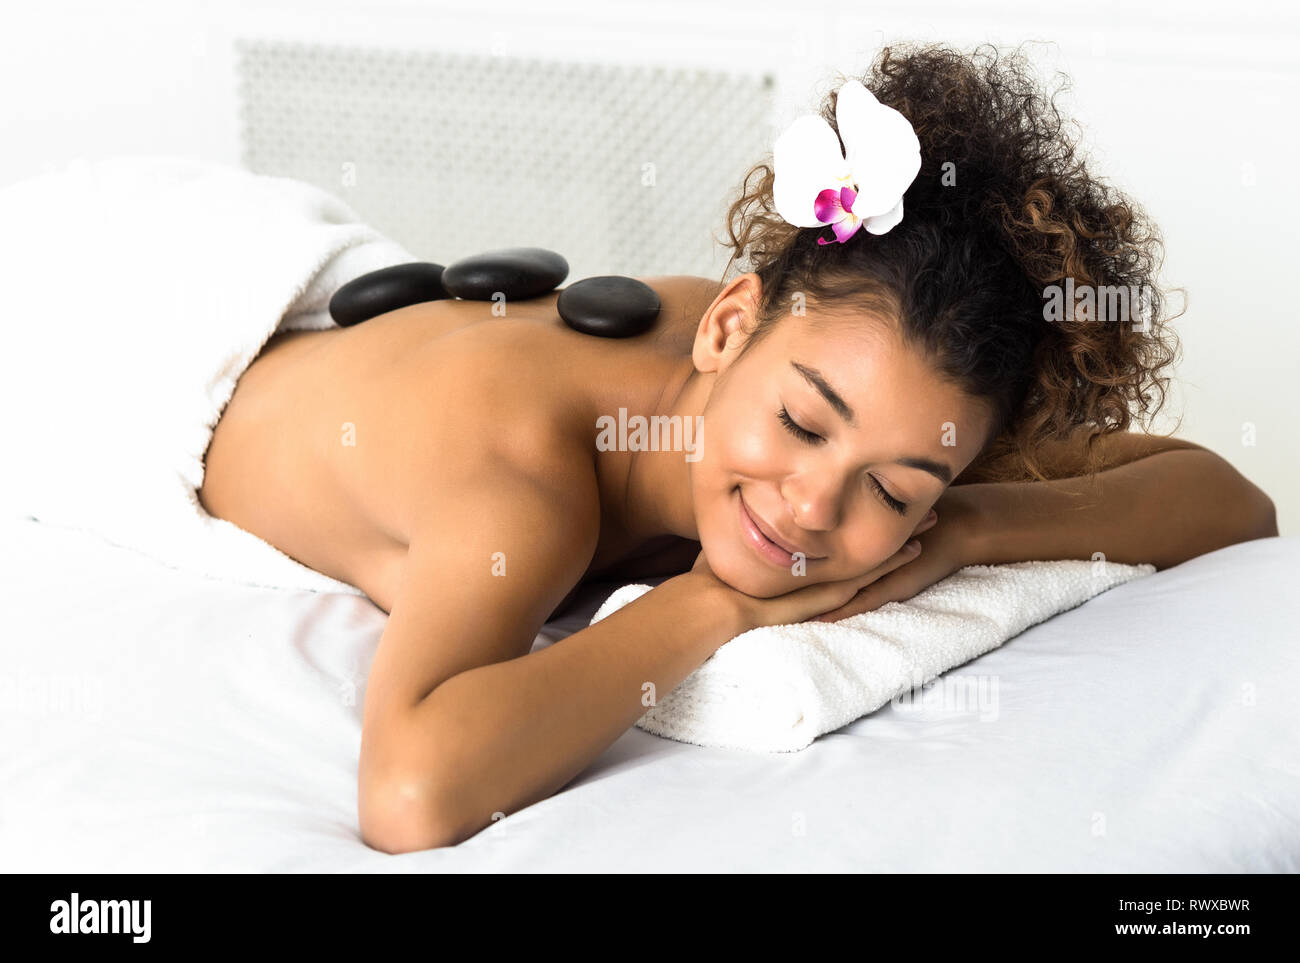 Stone massage. Woman relaxing at spa salon Banque D'Images